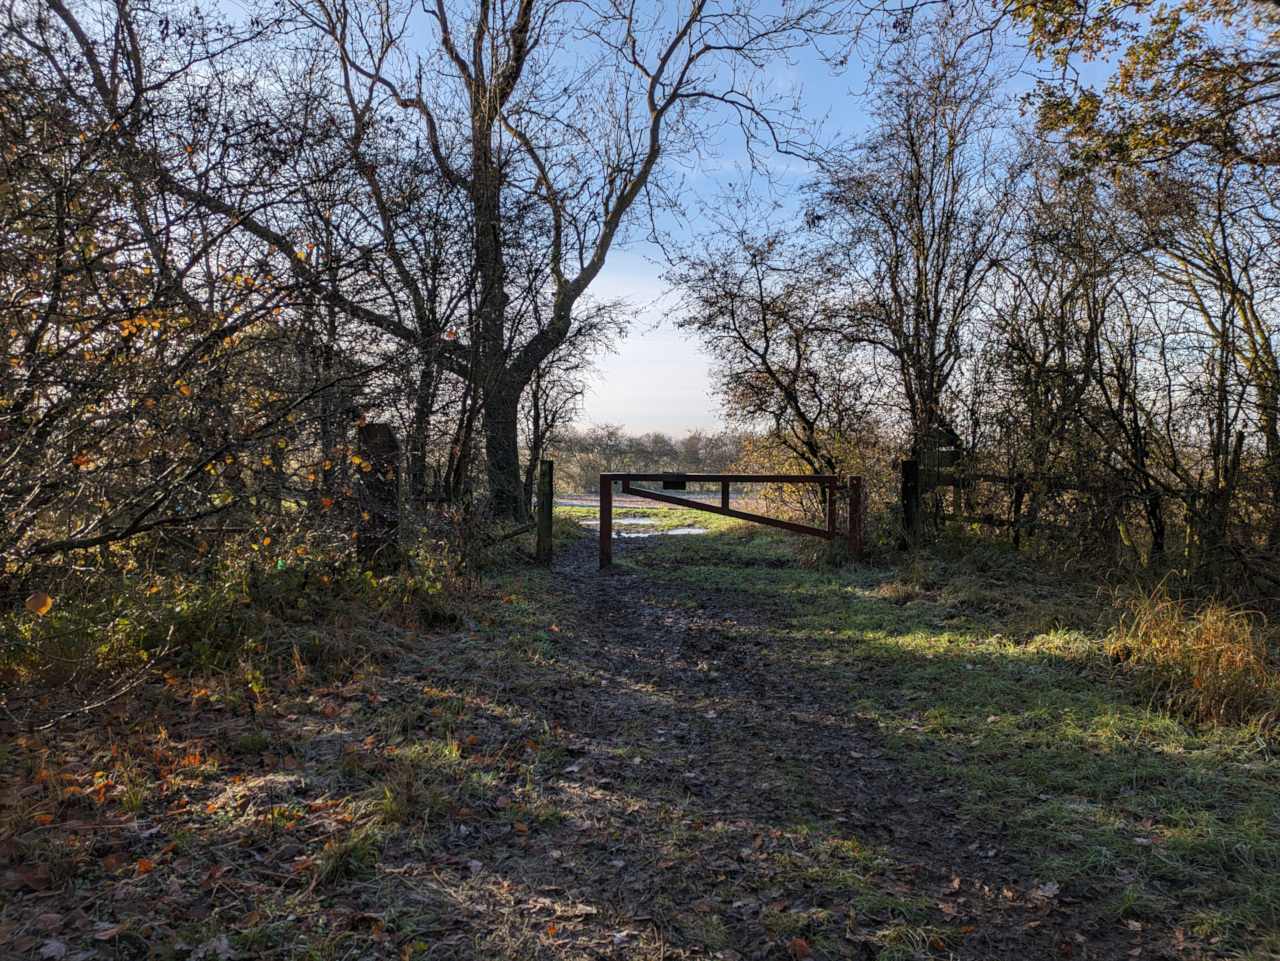 Footpath to exit gate, surrunding by trees and a muddy path